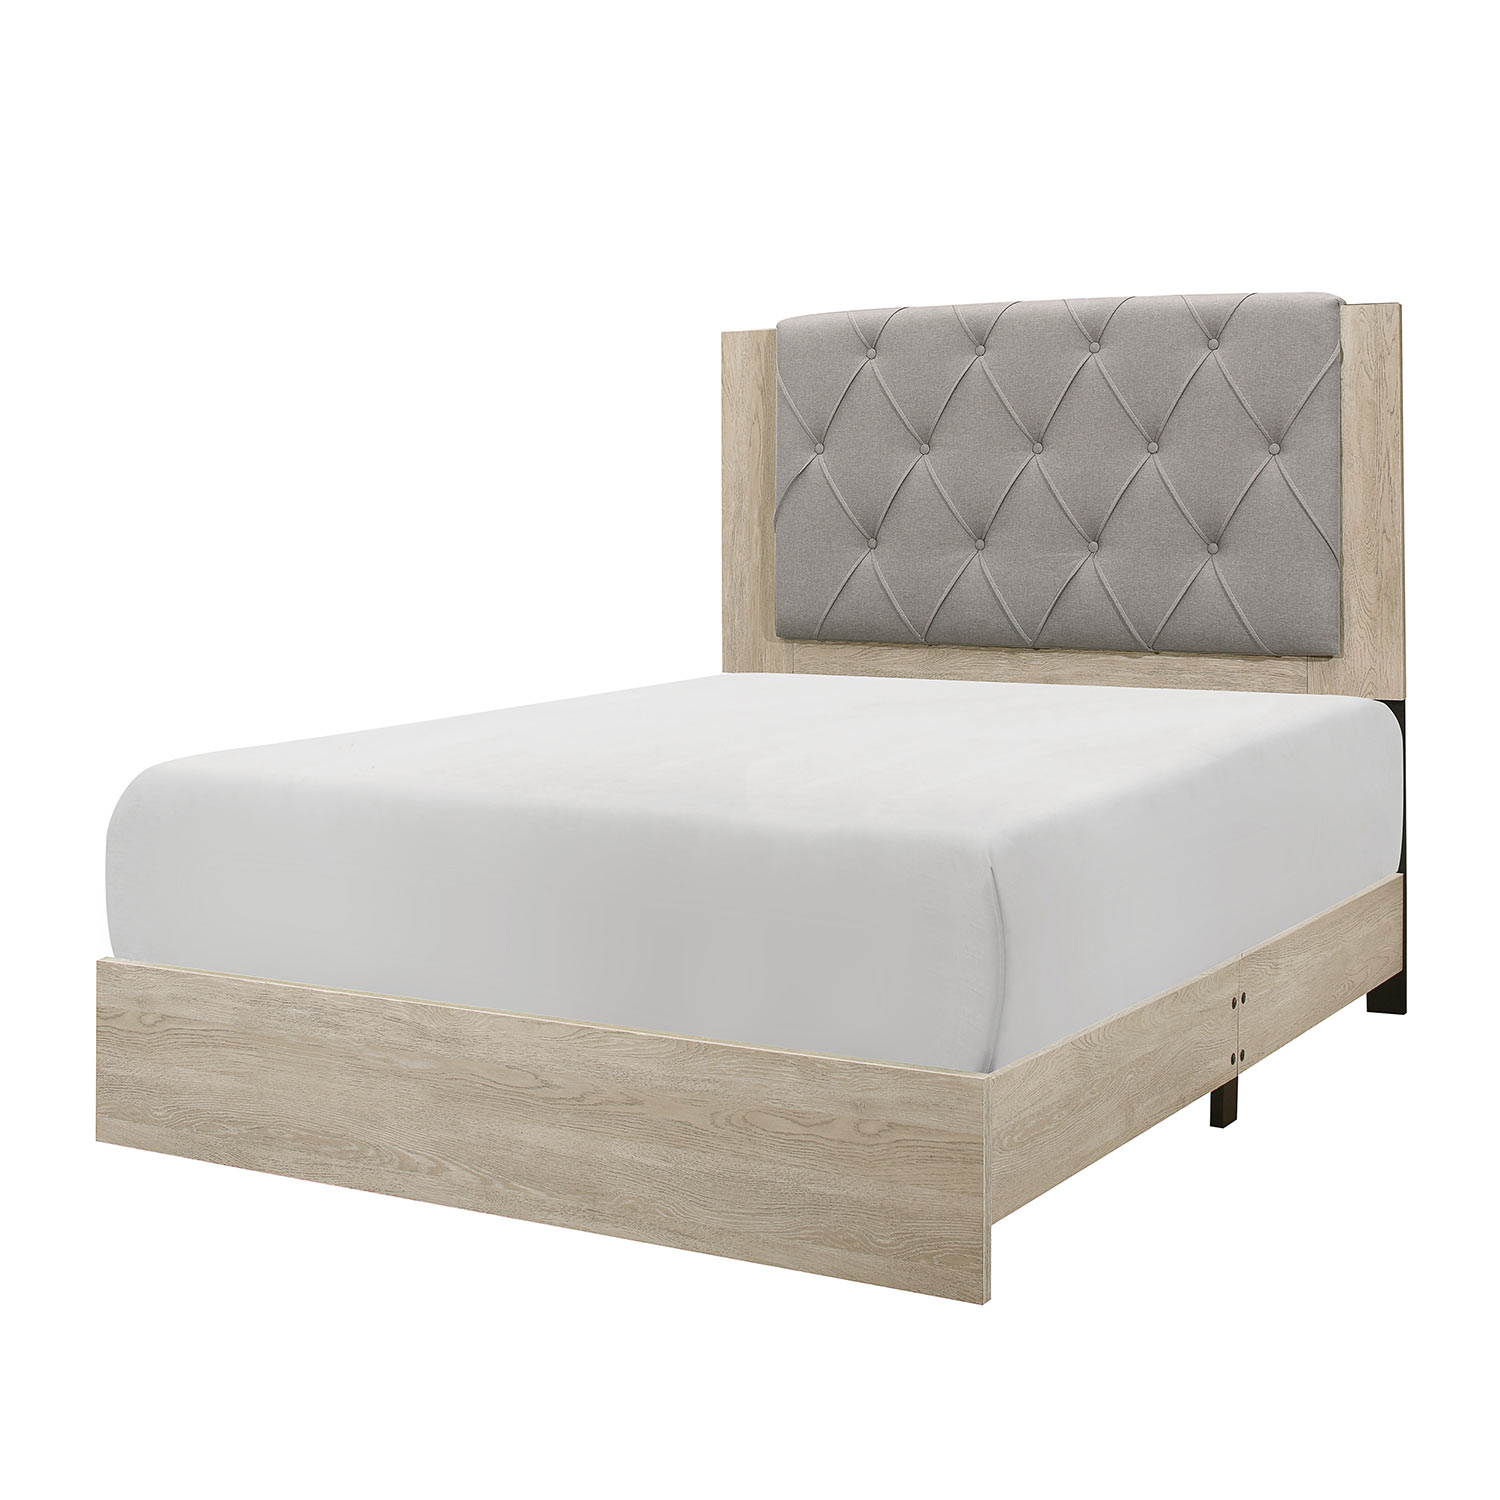 Homelegance Whiting Low Profile Bed - Cream and Black